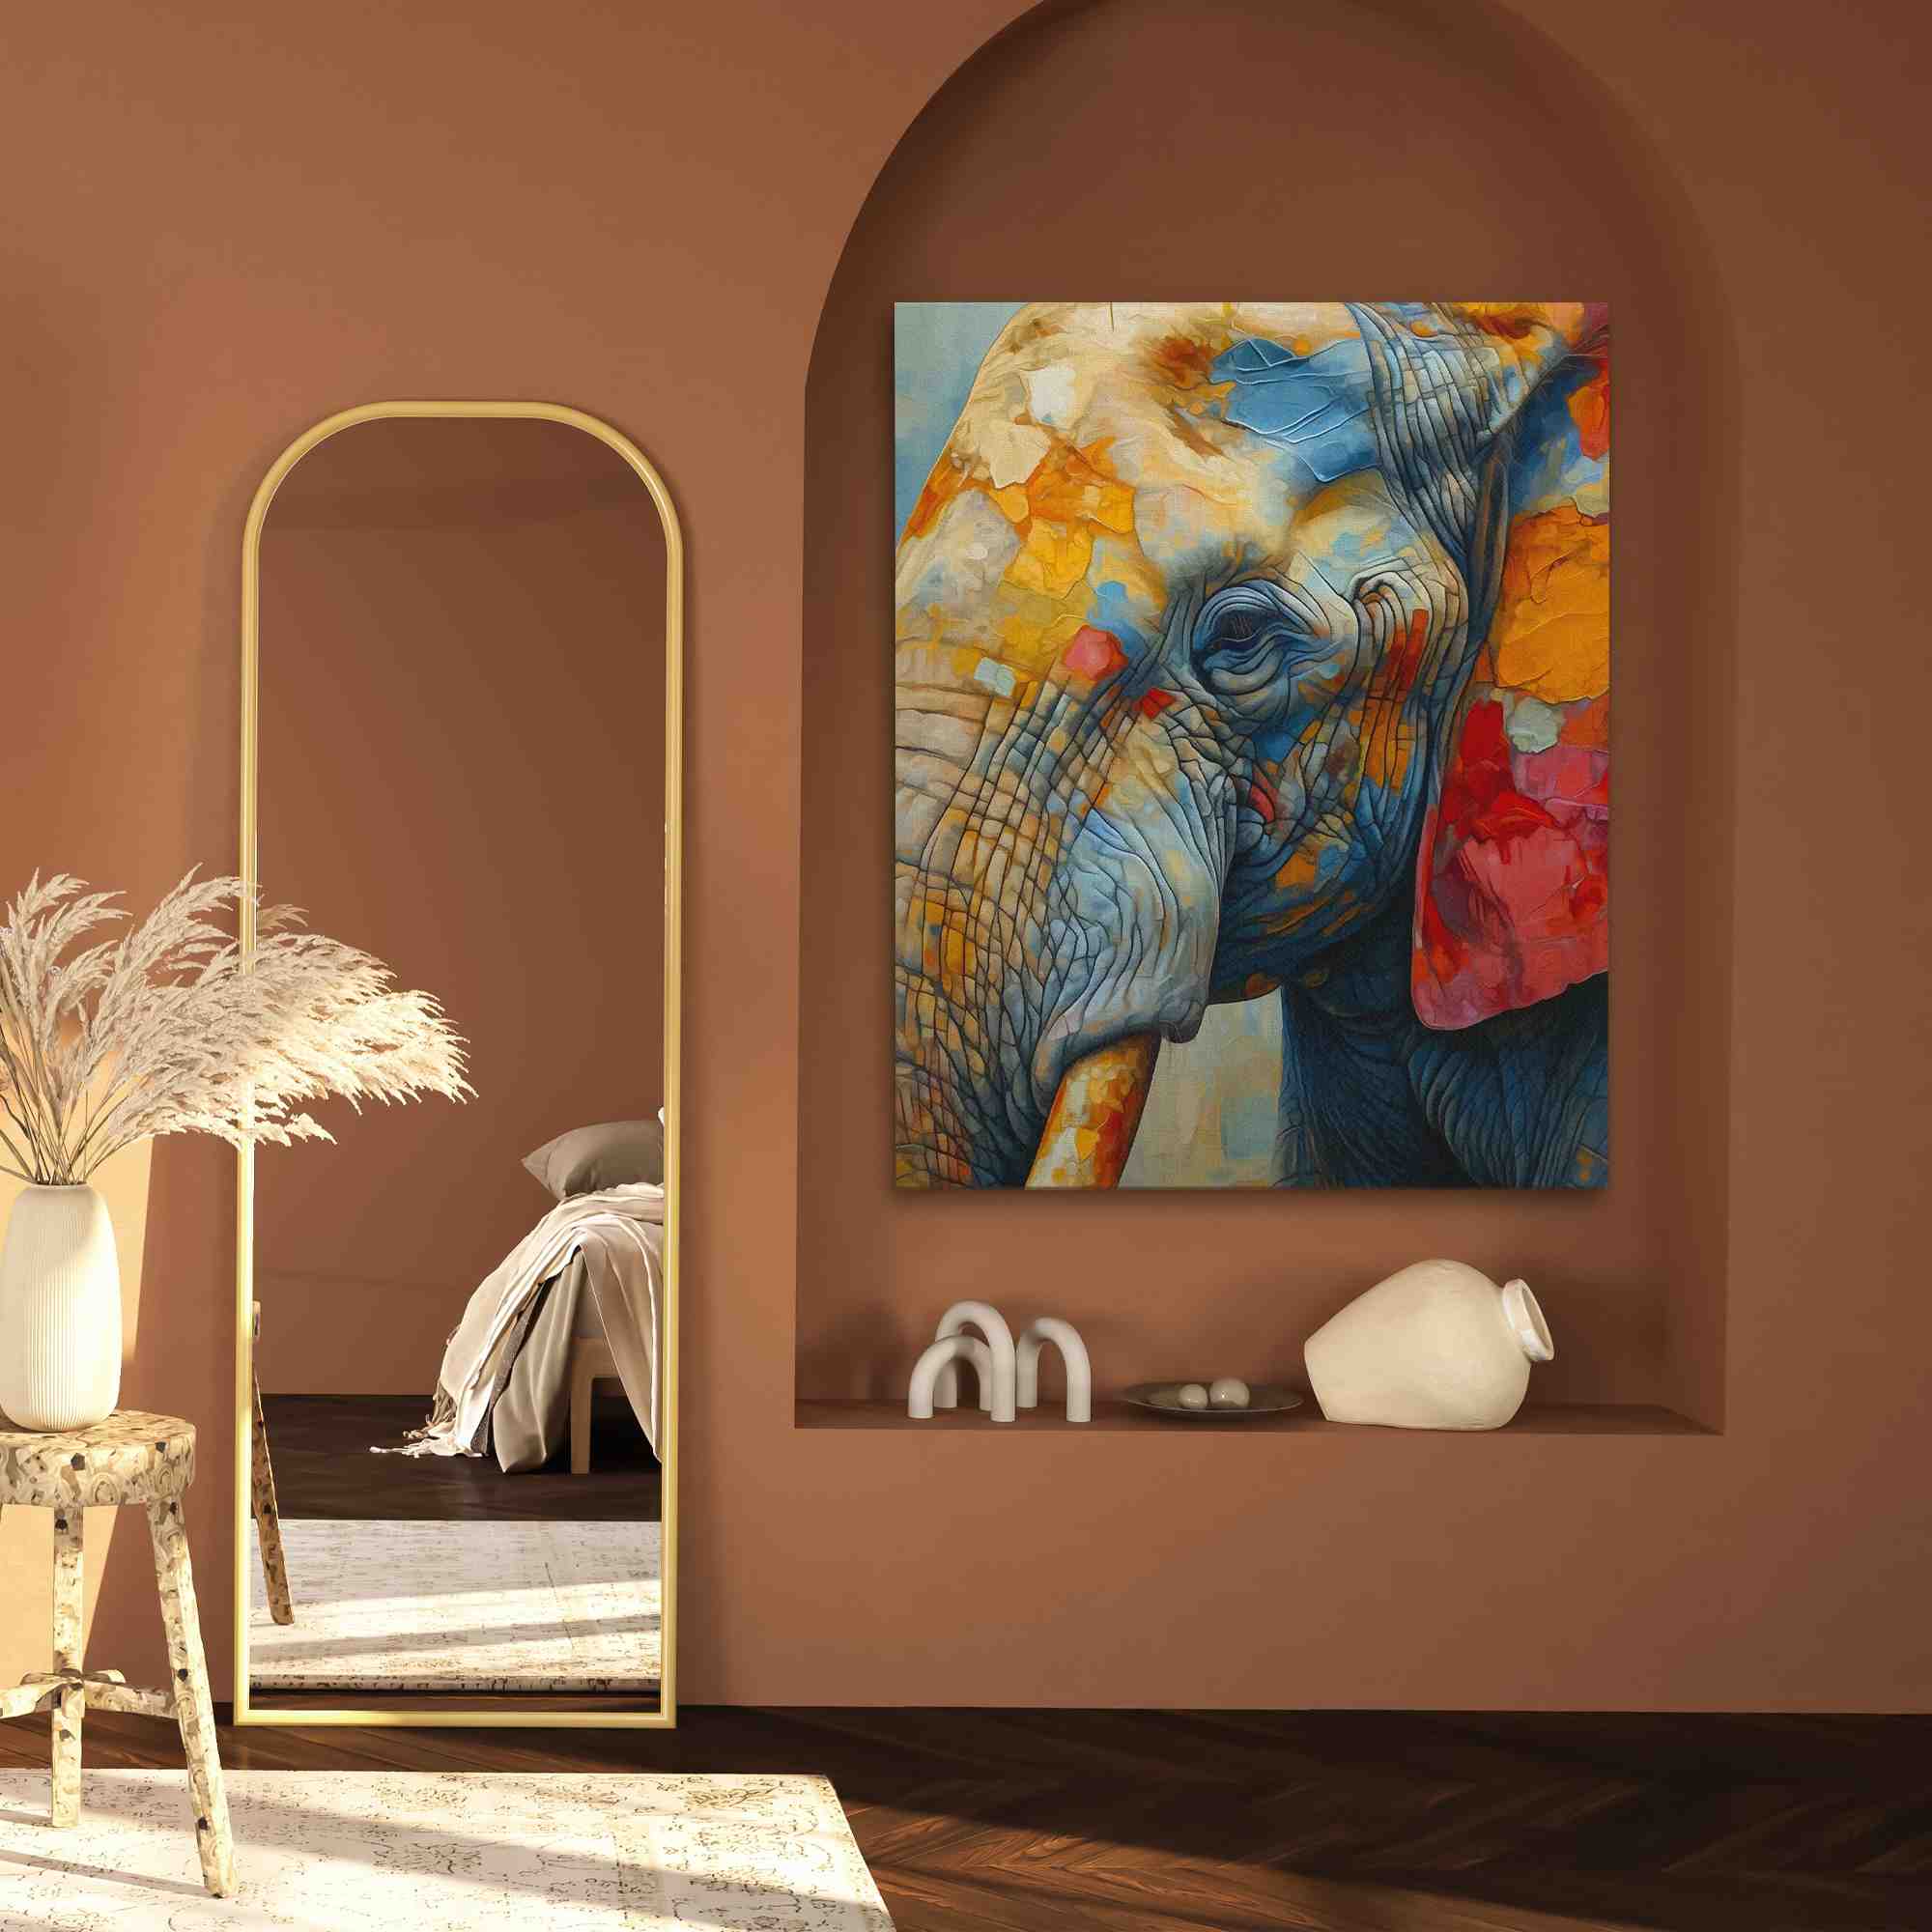 a painting of an elephant on a canvas